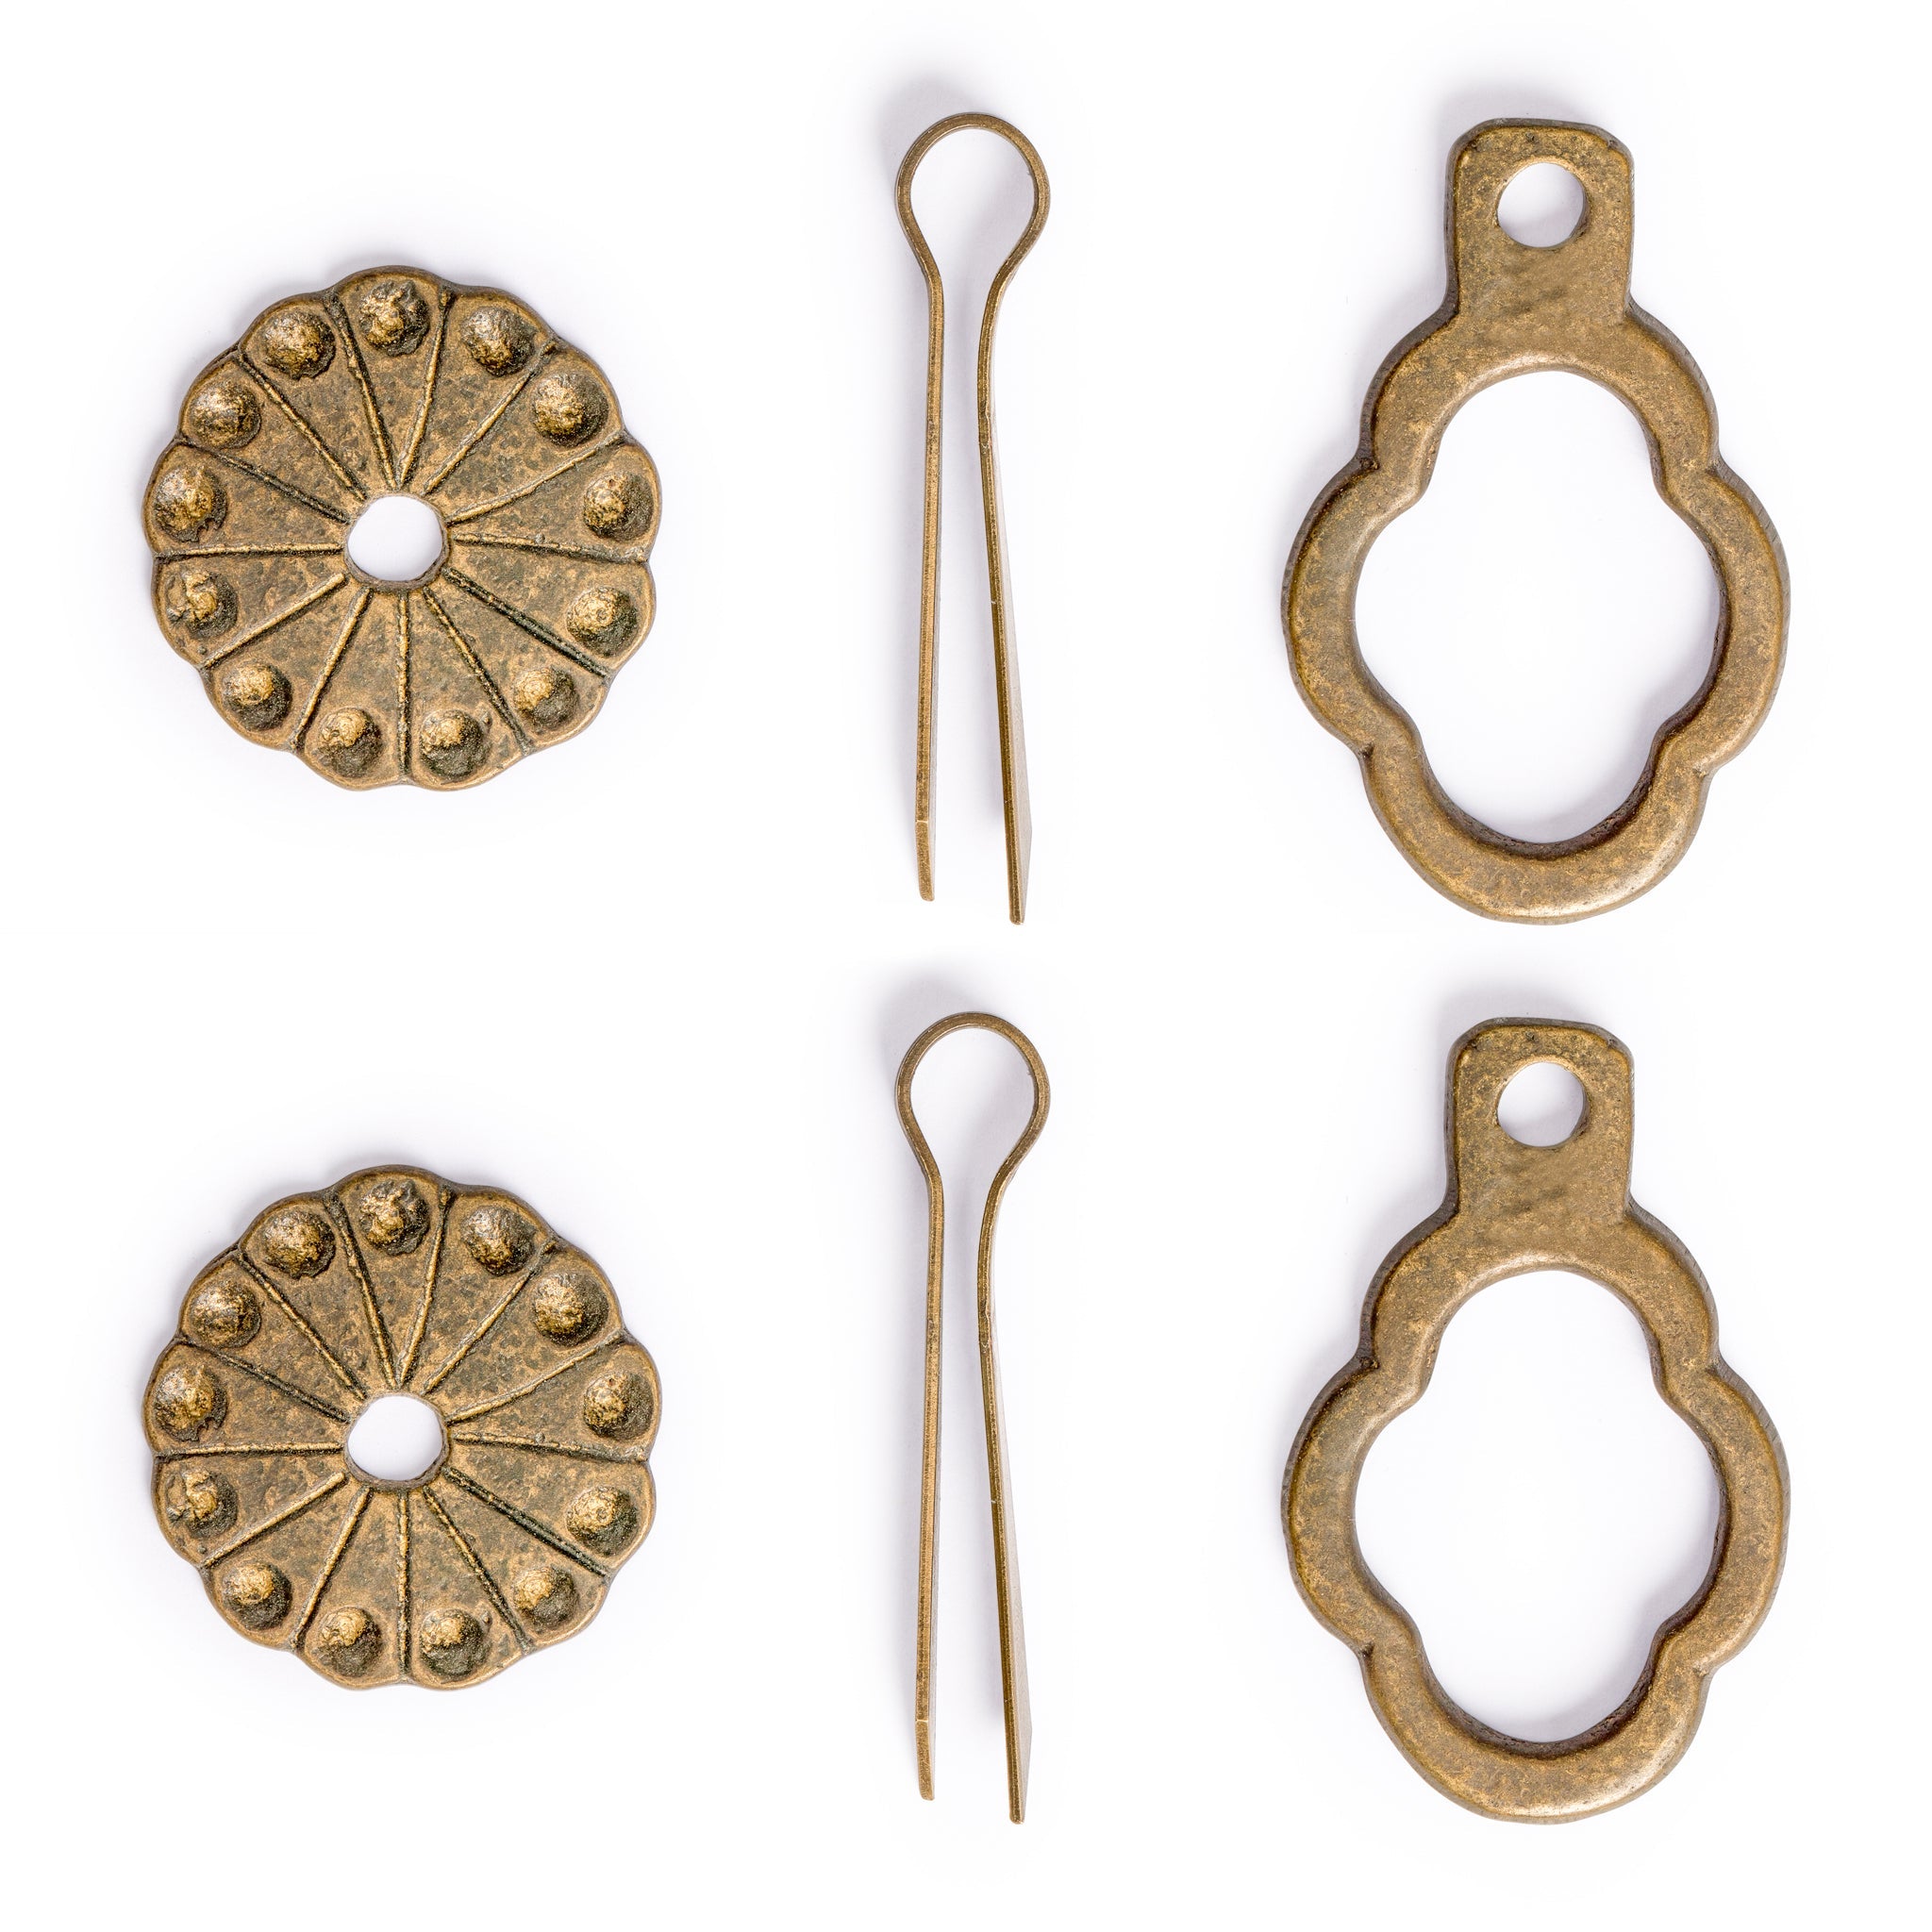 Sparrow Tail Pulls 2.4" - Set of 2-Chinese Brass Hardware